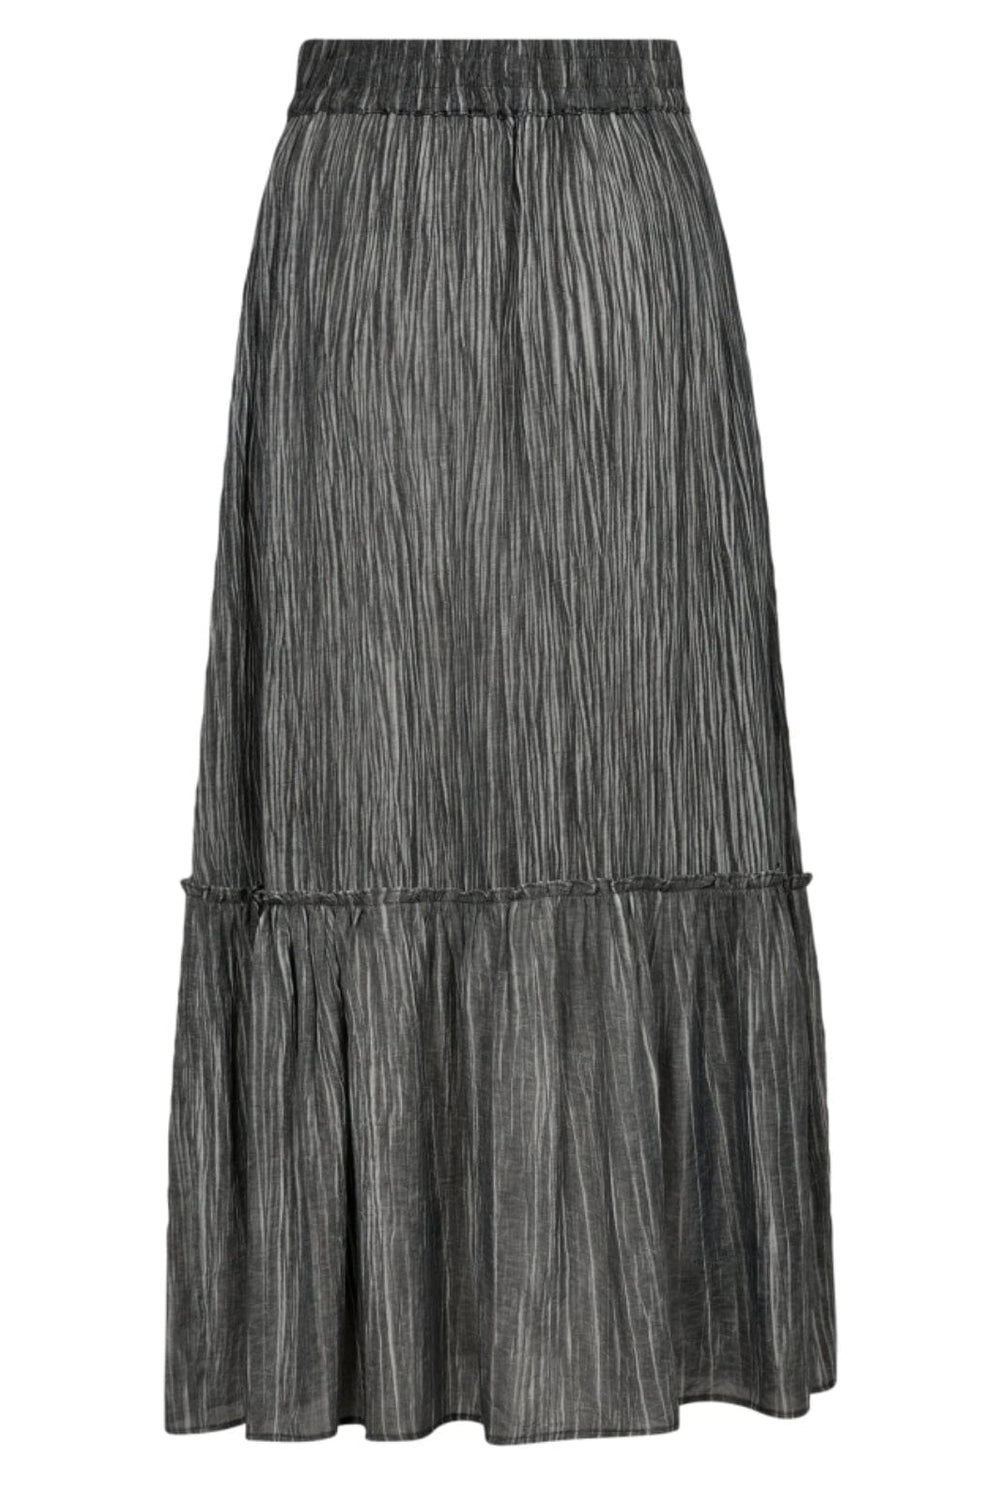 Forudbestilling - Co´couture - Softcc Dye Gypsy Skirt 34139 - 94 Antracit Nederdele 